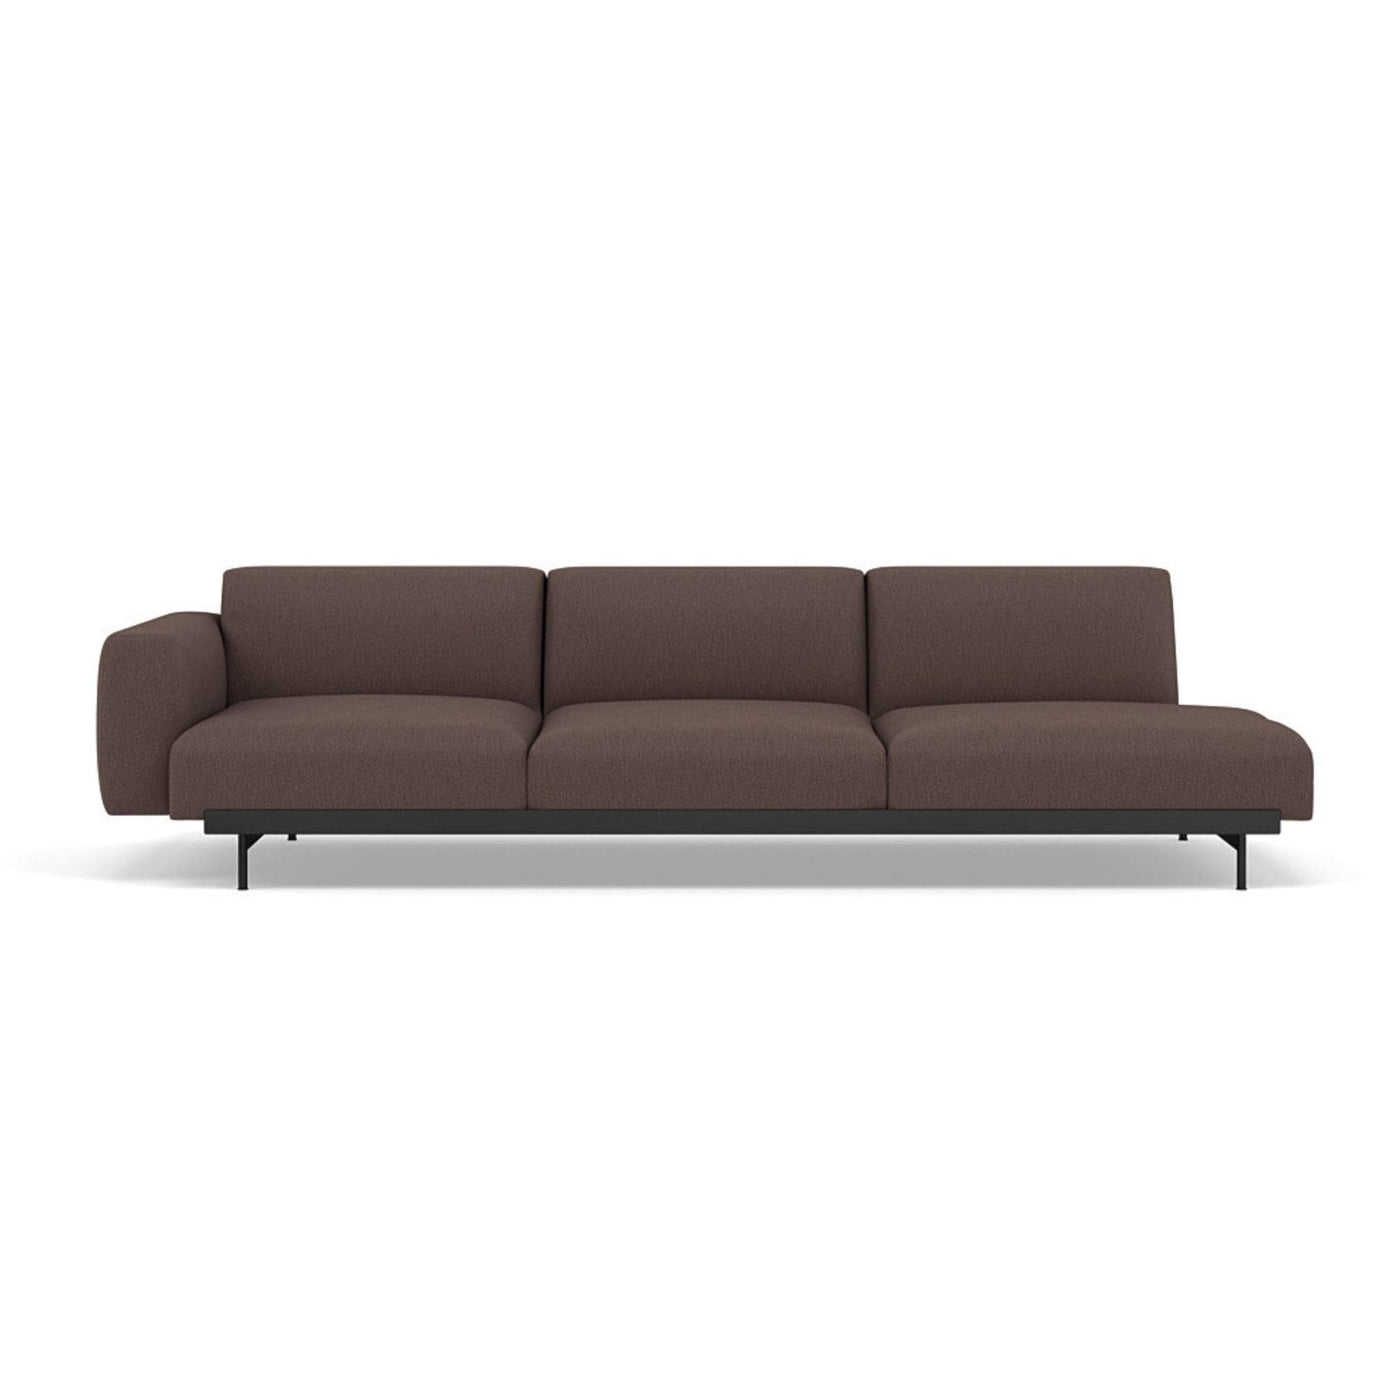 Muuto In Situ Sofa 3 seater configuration 3 in clay 6 fabric. Made to order at someday designs. #colour_clay-6-red-brown